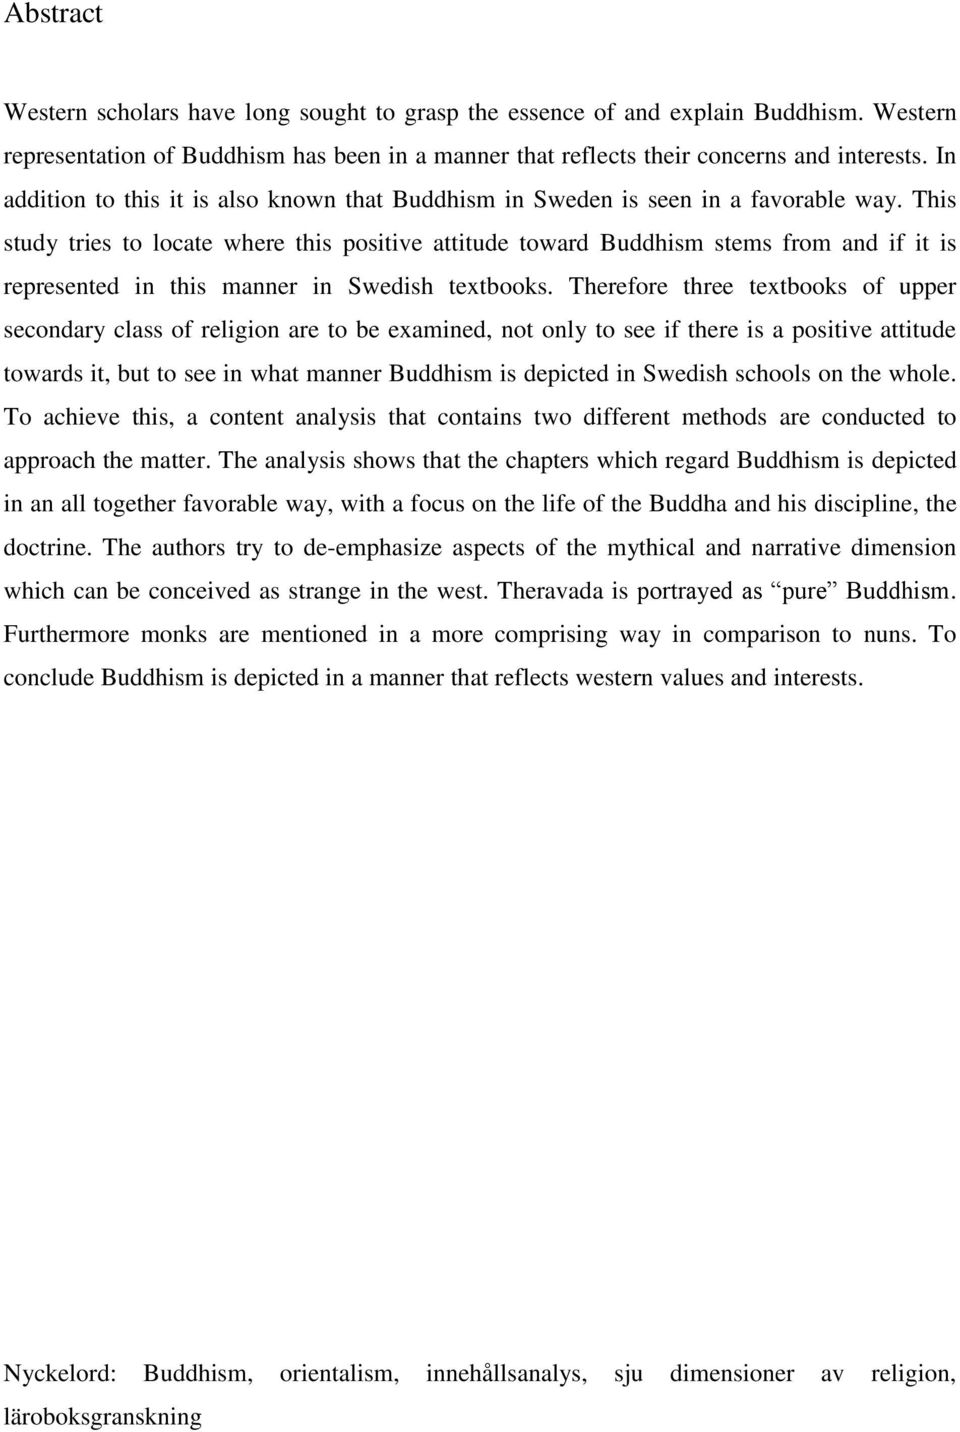 This study tries to locate where this positive attitude toward Buddhism stems from and if it is represented in this manner in Swedish textbooks.